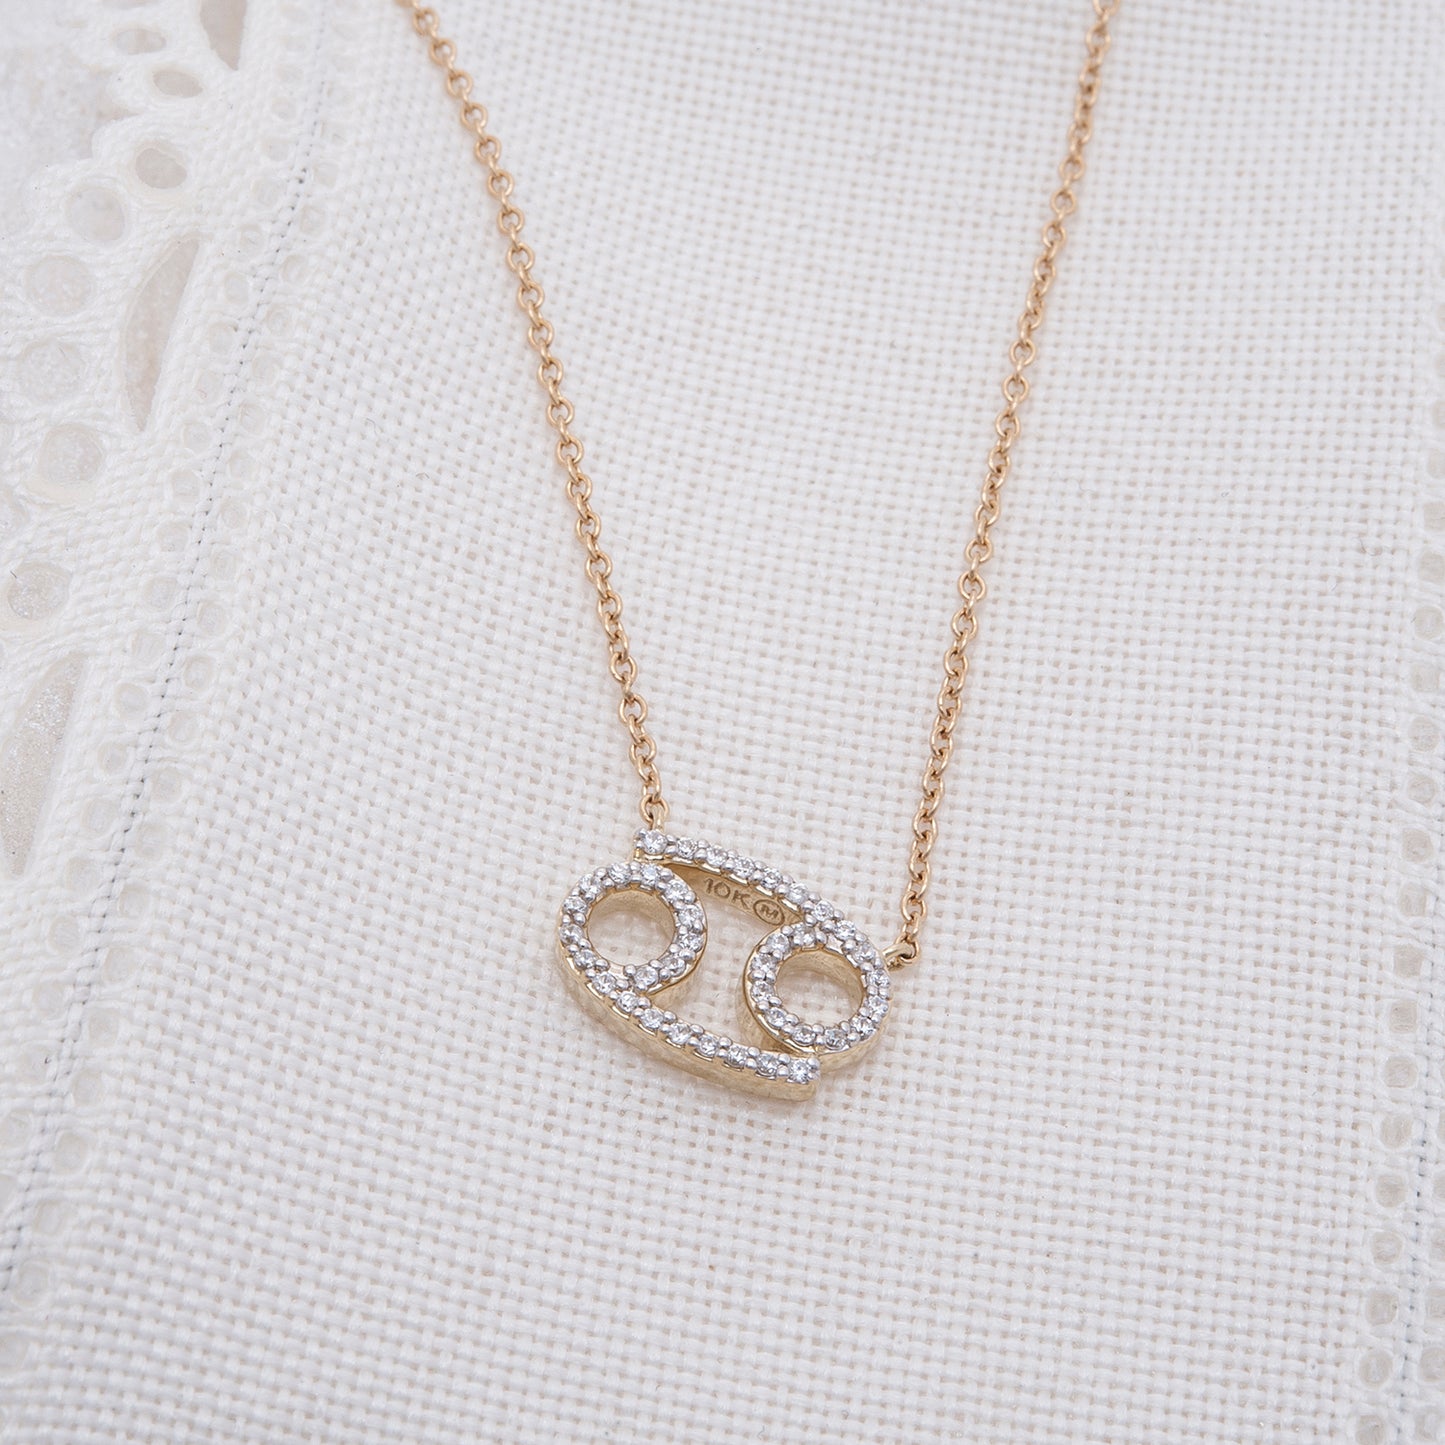 Cancer Zodiac Diamond Necklace With Gold Chain